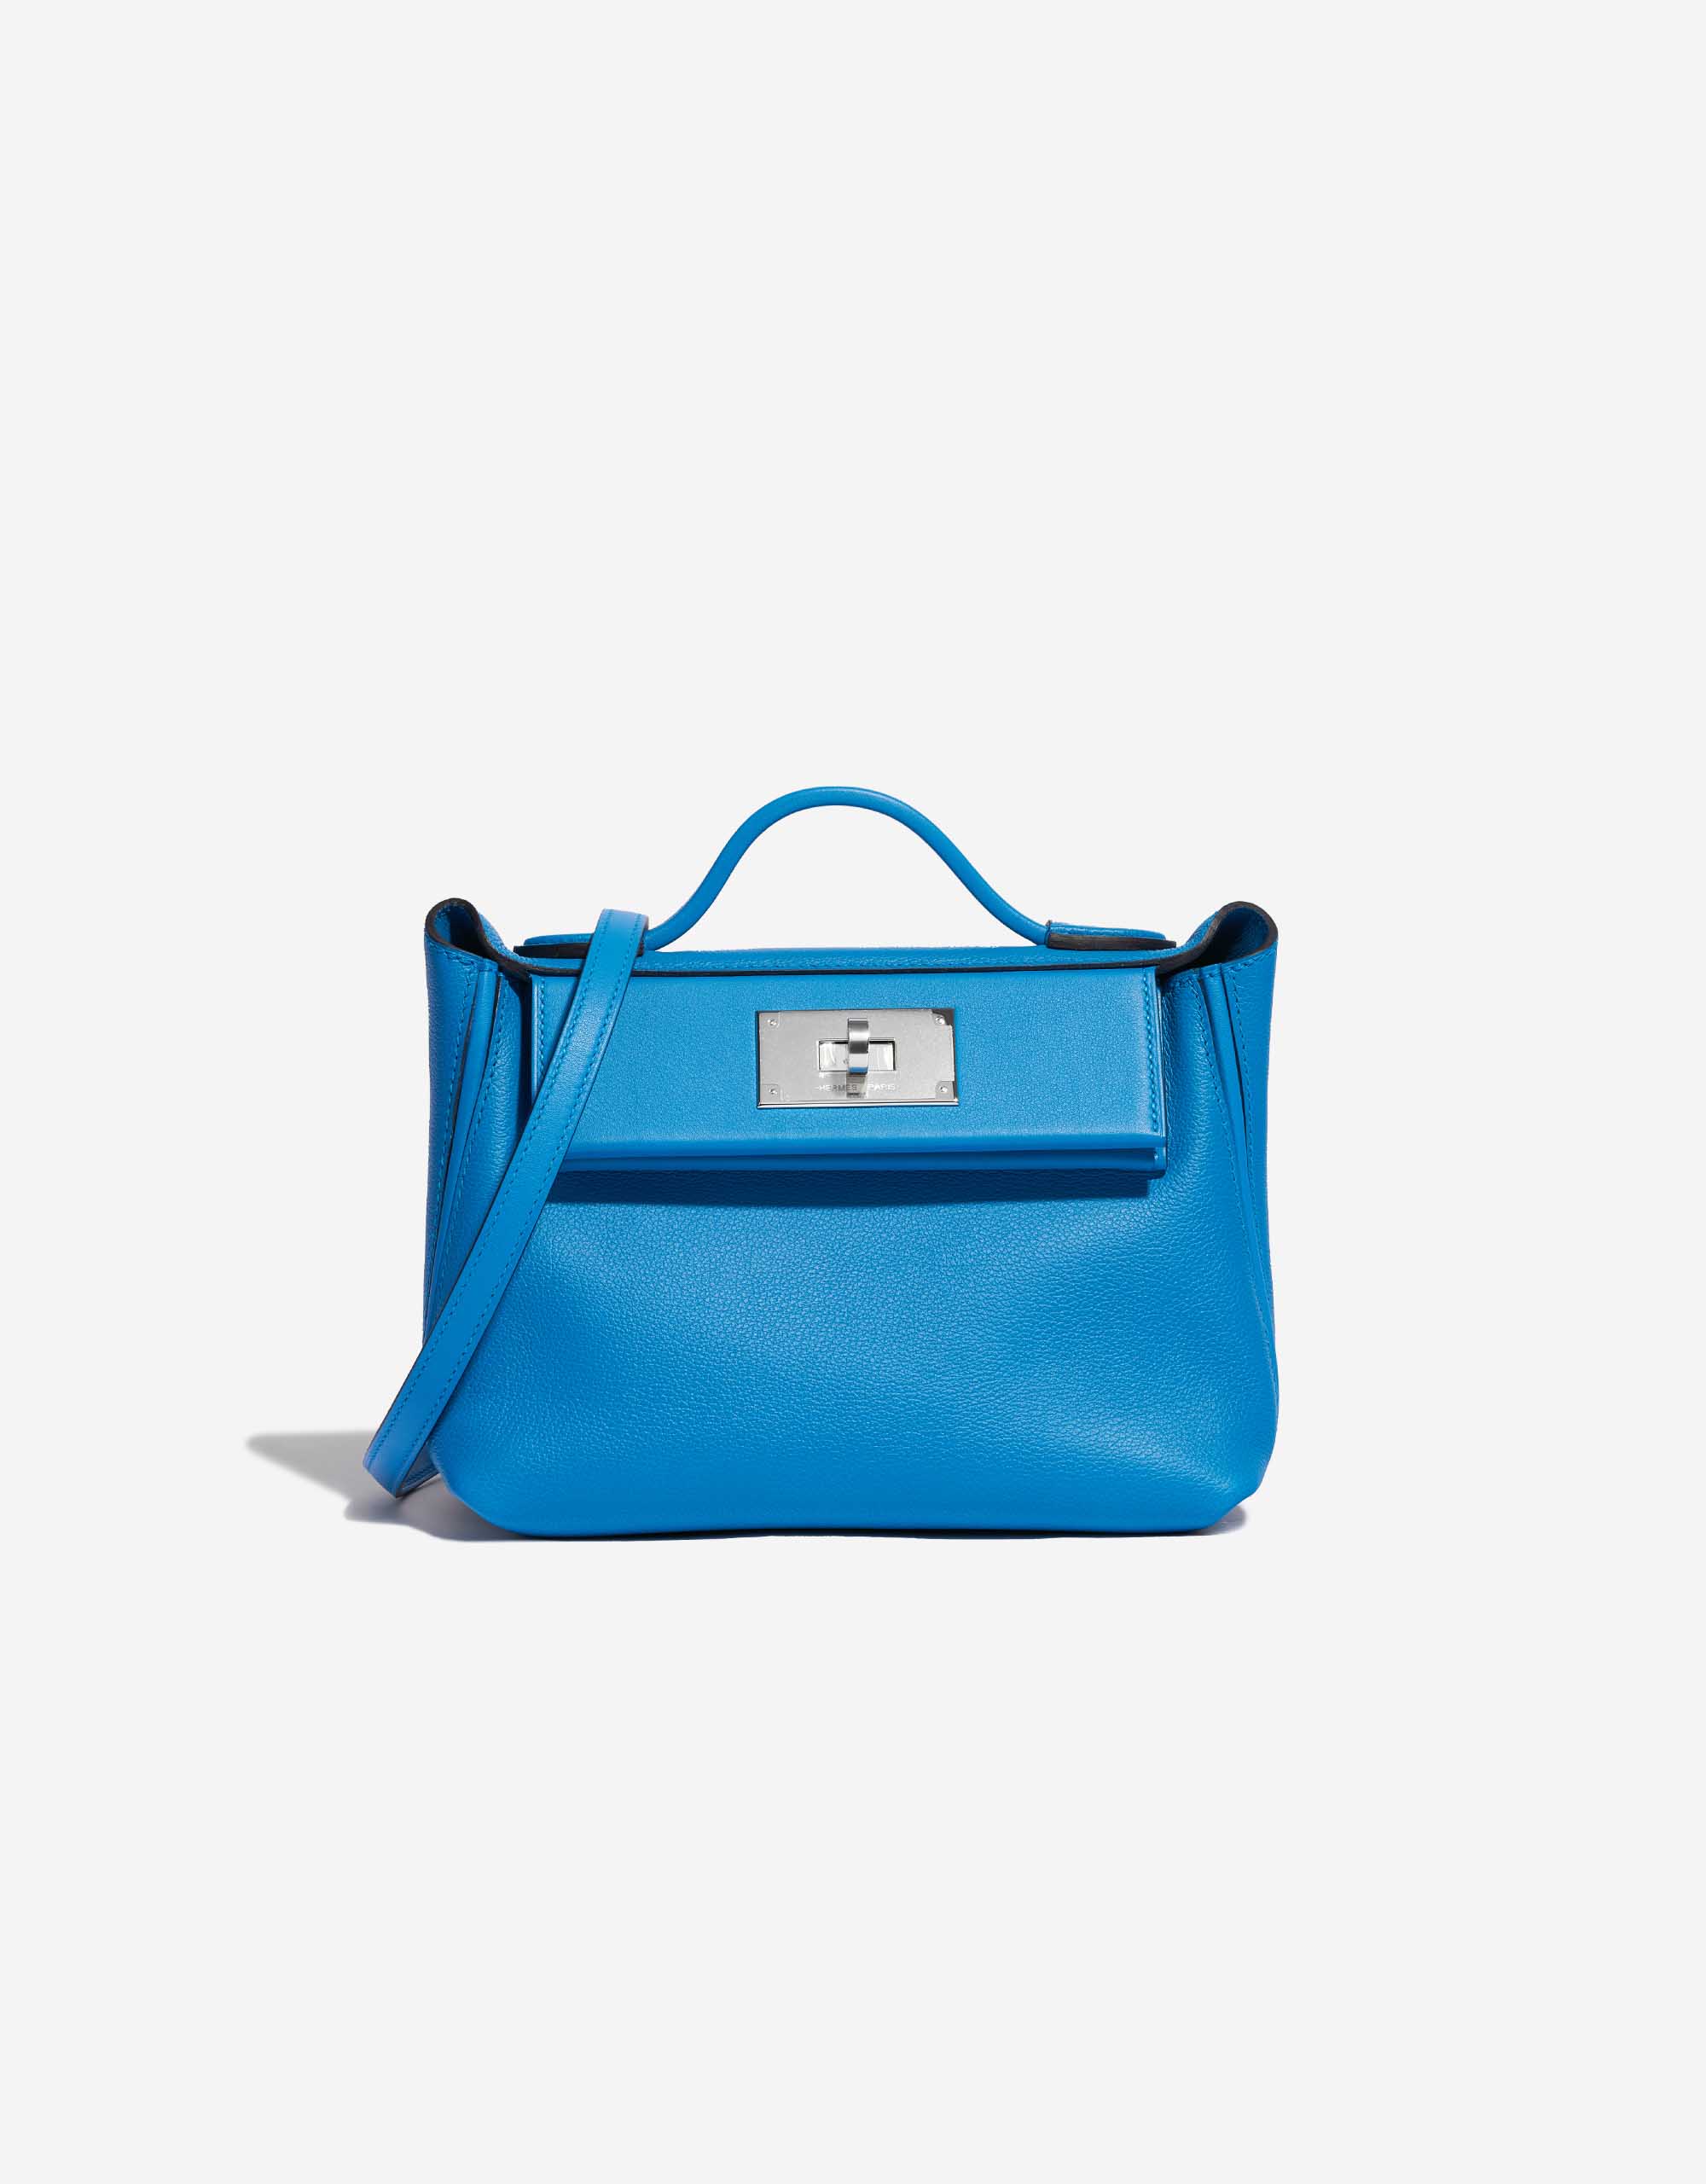 HERMÈS 24/24 - 21 handbag in Bleu Nuit, Black, Caban and Bleu France  Evercolor leather with Permabrass hardware-Ginza Xiaoma – Authentic Hermès  Boutique